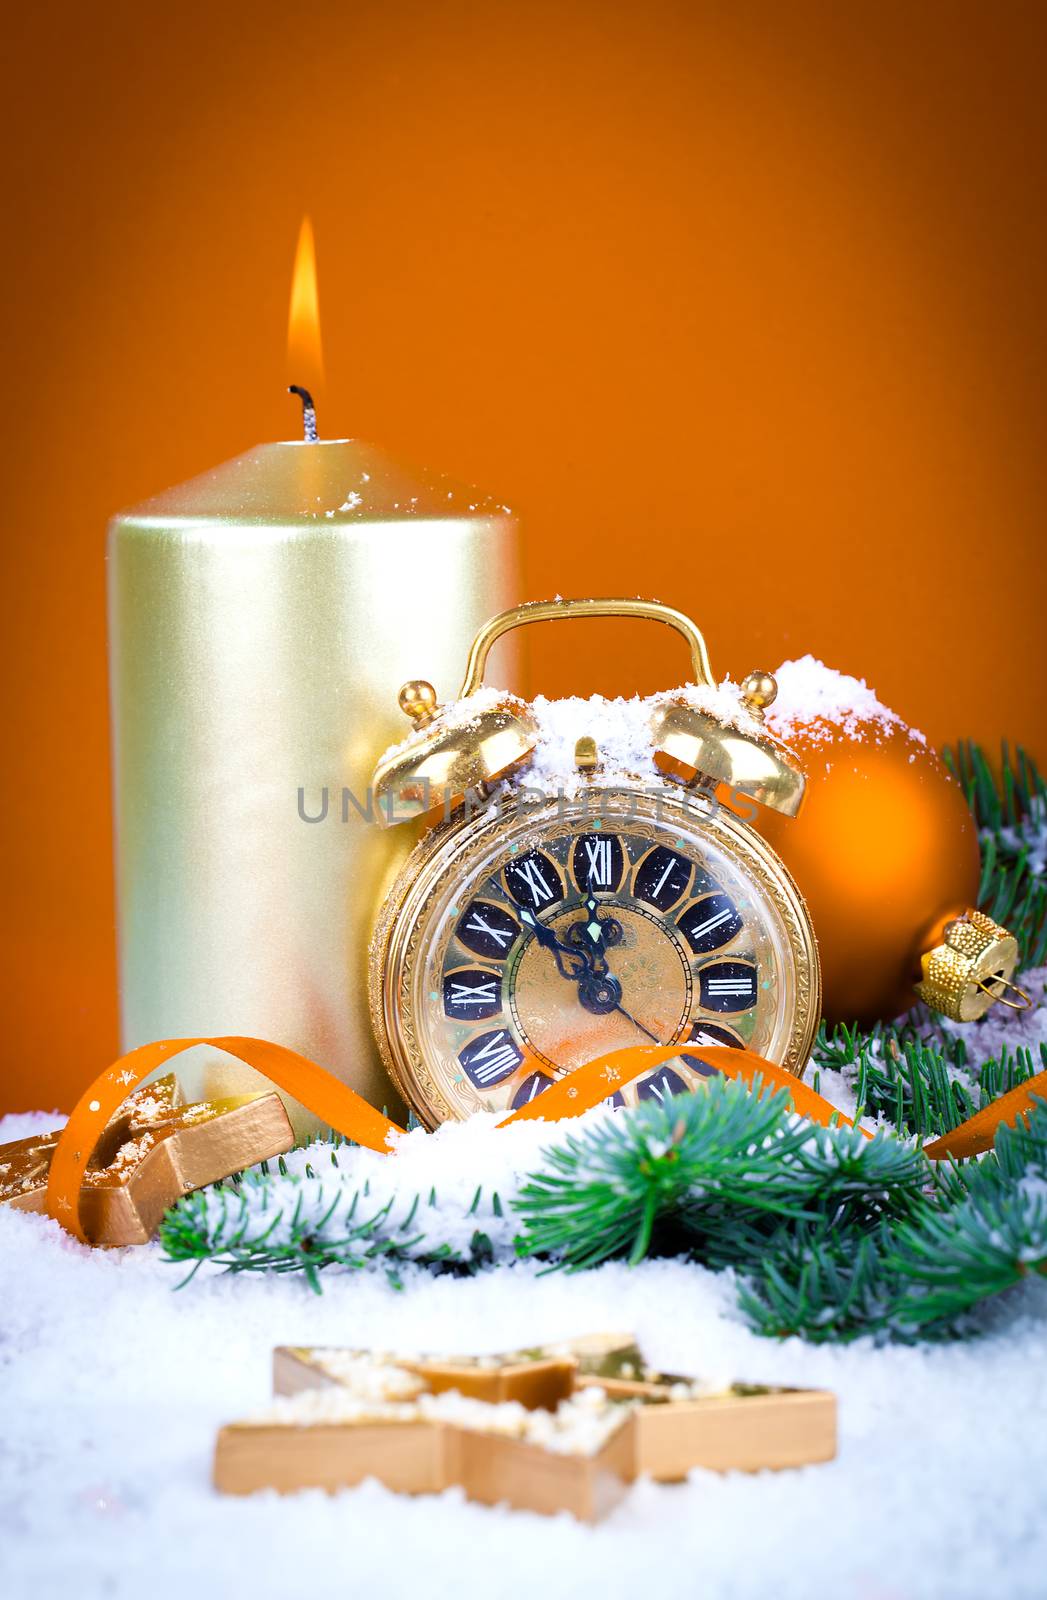 Christmas decorations - clock for the new year, candle, pine bra by motorolka